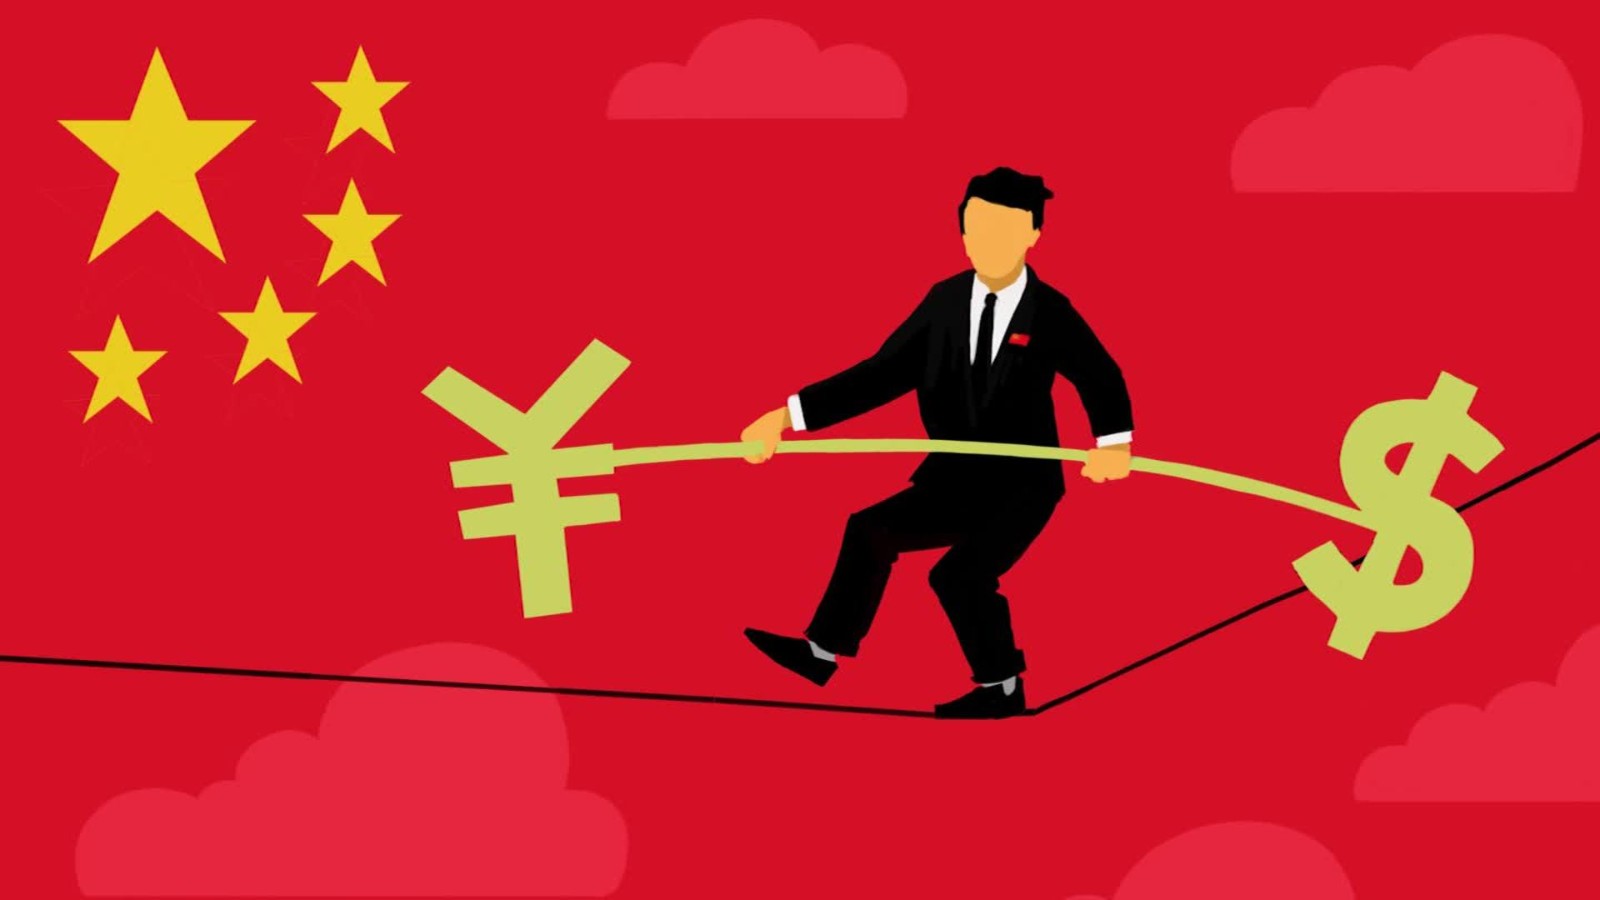 will chinese economy ever surpass the us economy?